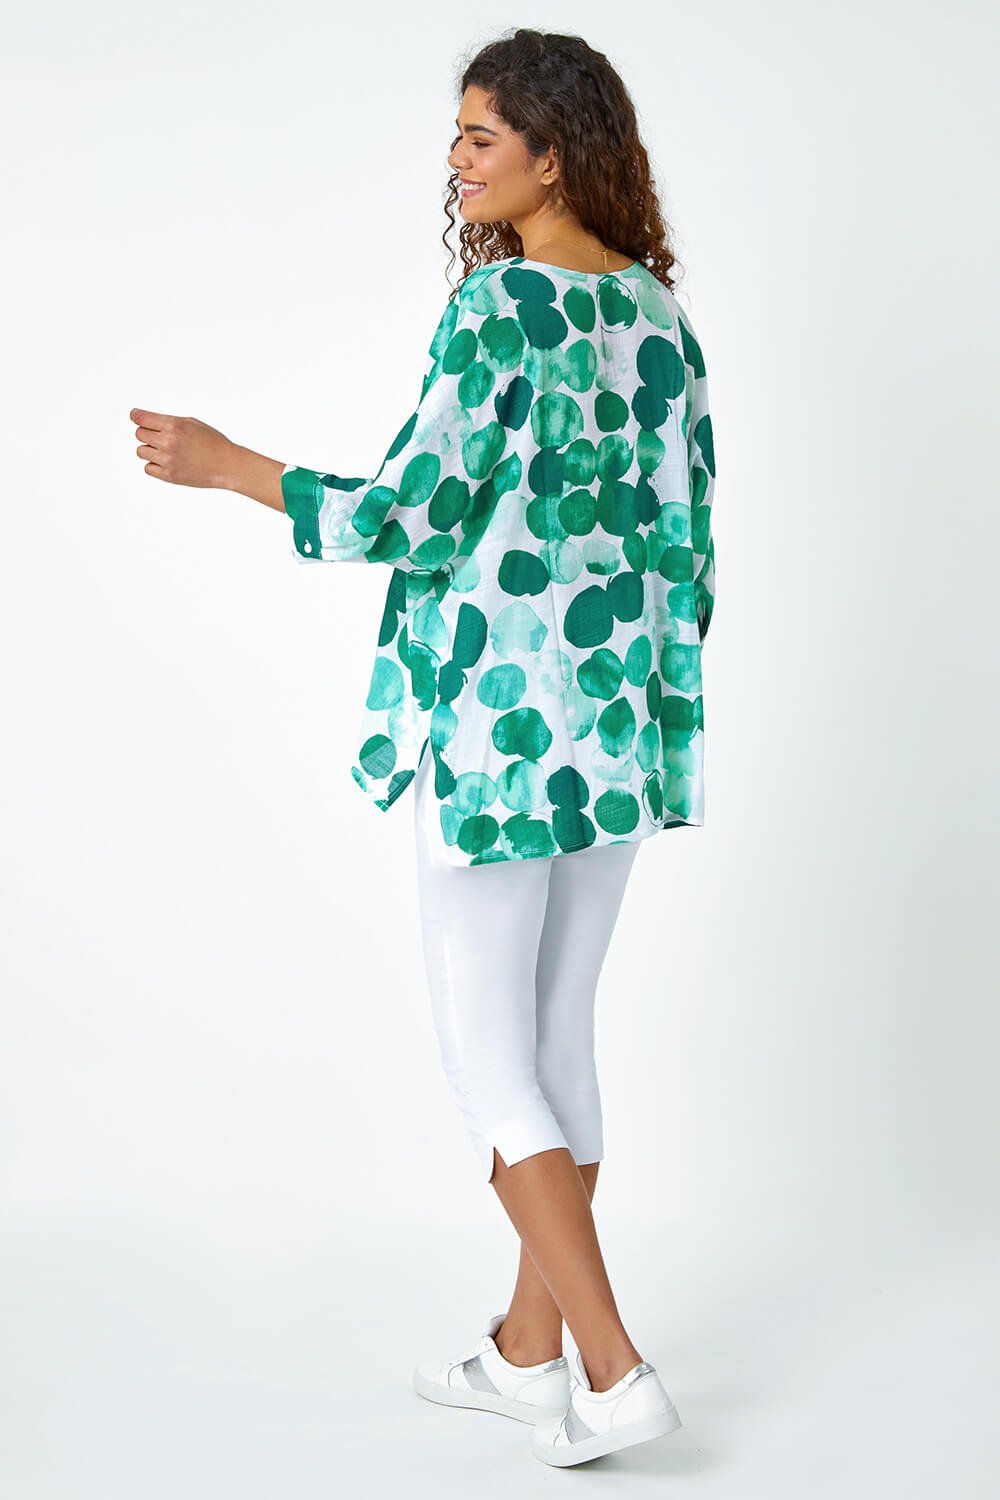 Green Spot Print Relaxed Woven Top, Image 3 of 5